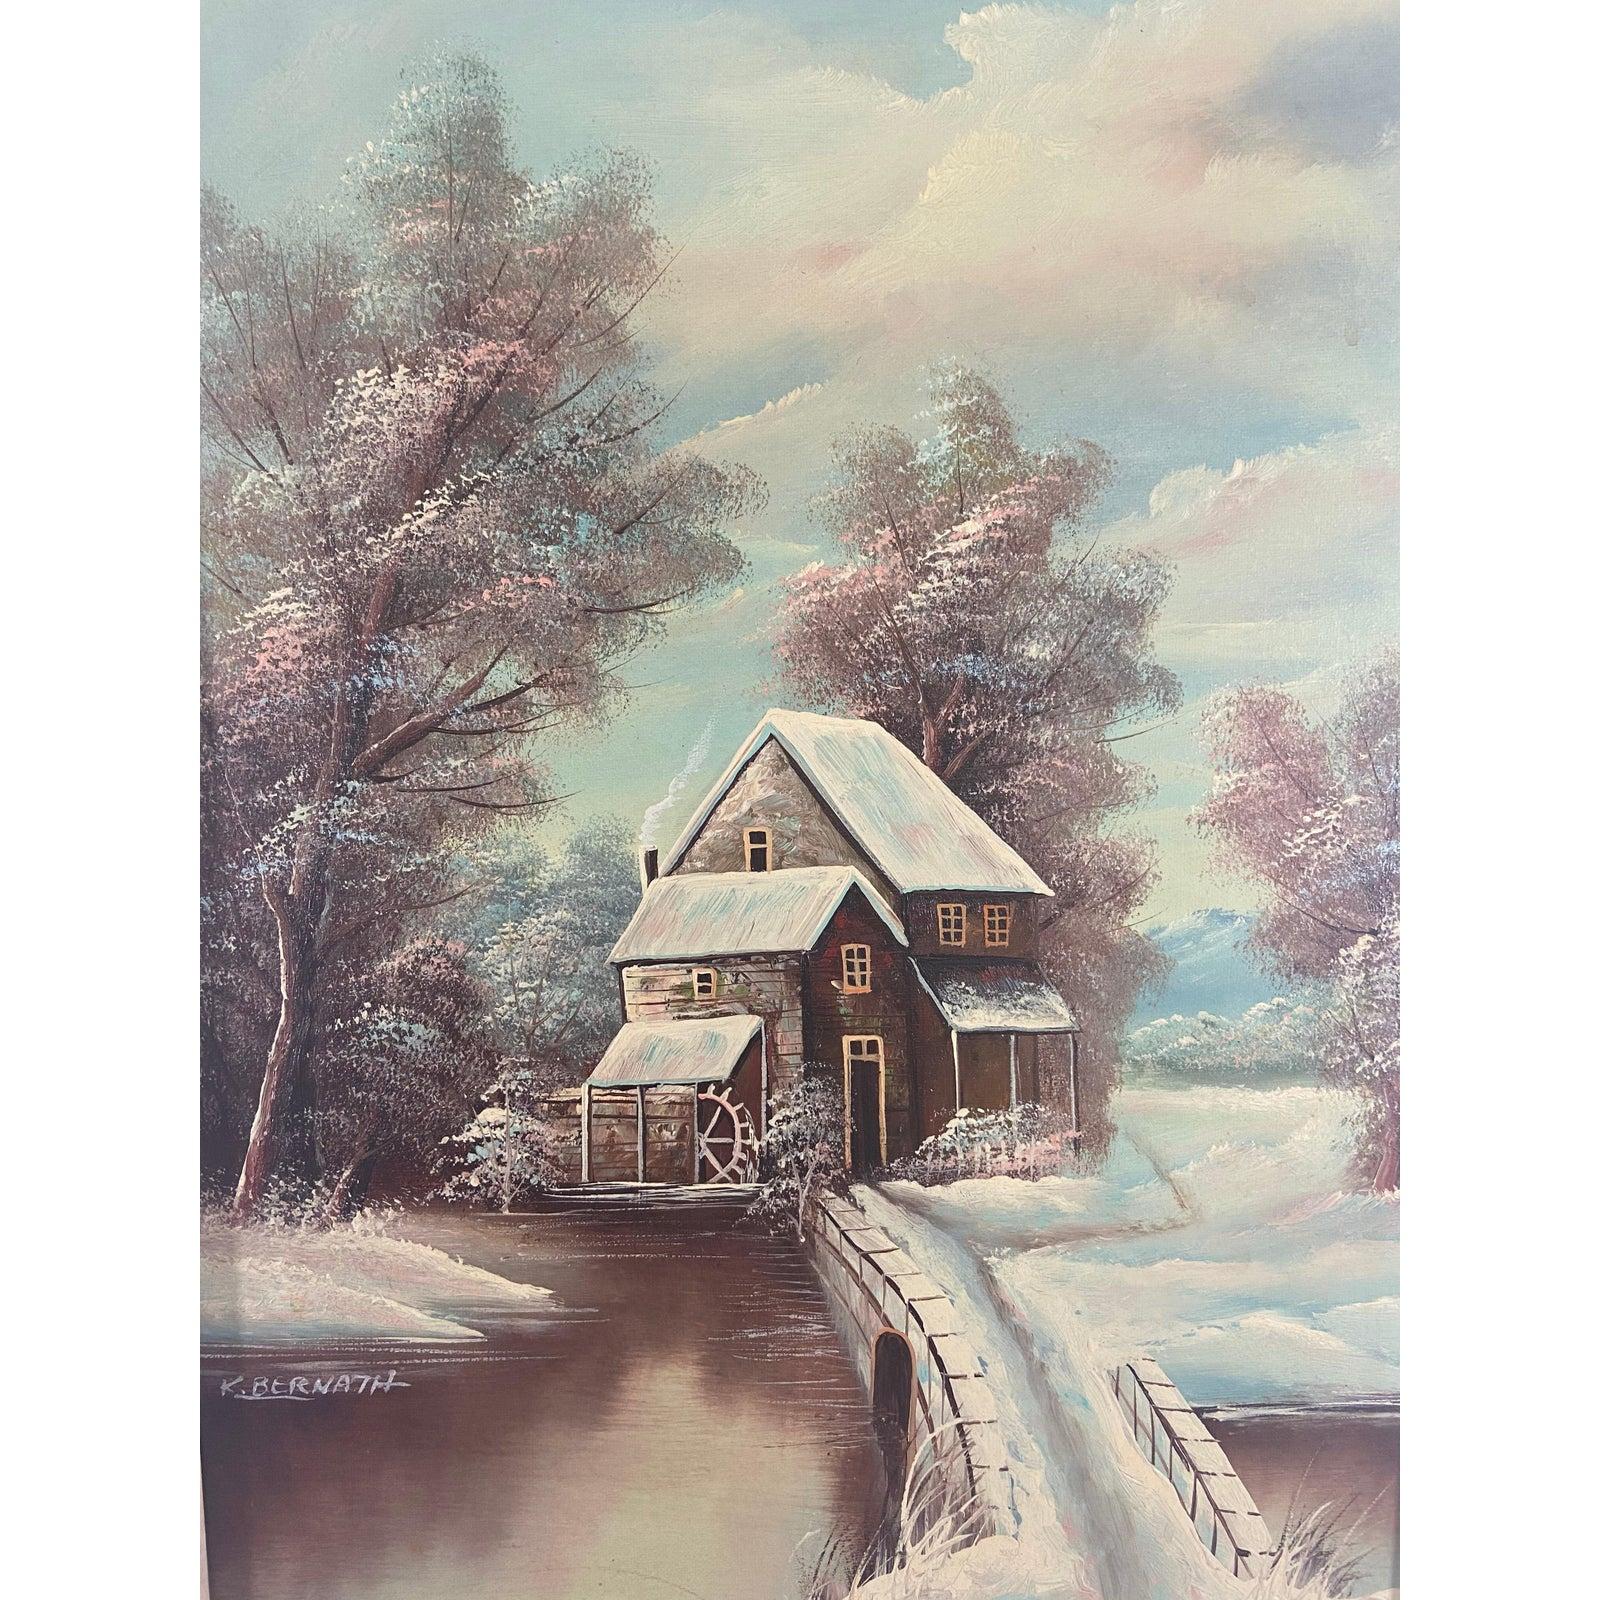 A landscape snowy scene by K.Bernath. The day snowy scene depicts a house / cabin in the middle of the snowy woods with a blue sky. The painting is framed. 

Dimensions
Framed: 17.75